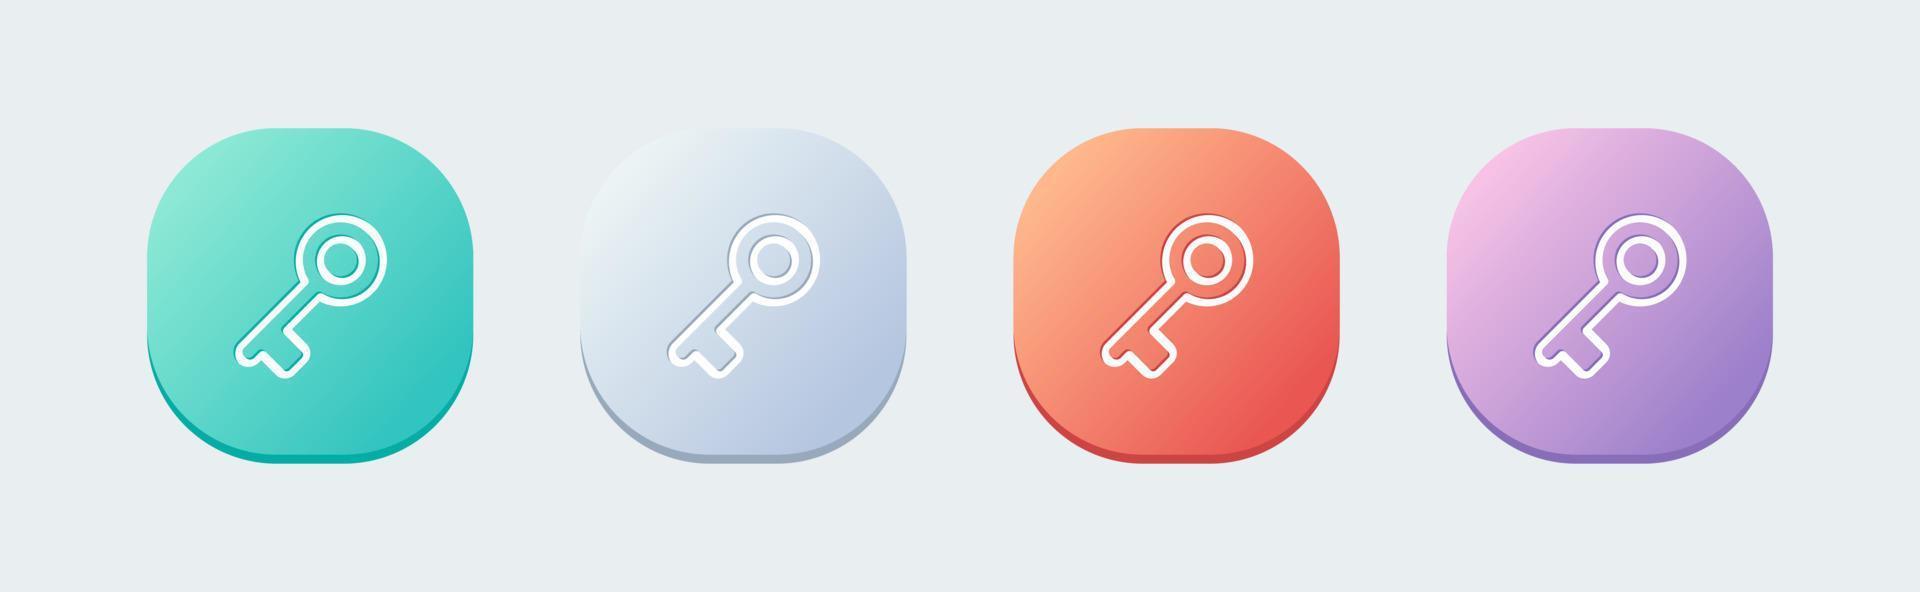 Key line icon in flat design style. Opener signs vector illustration.